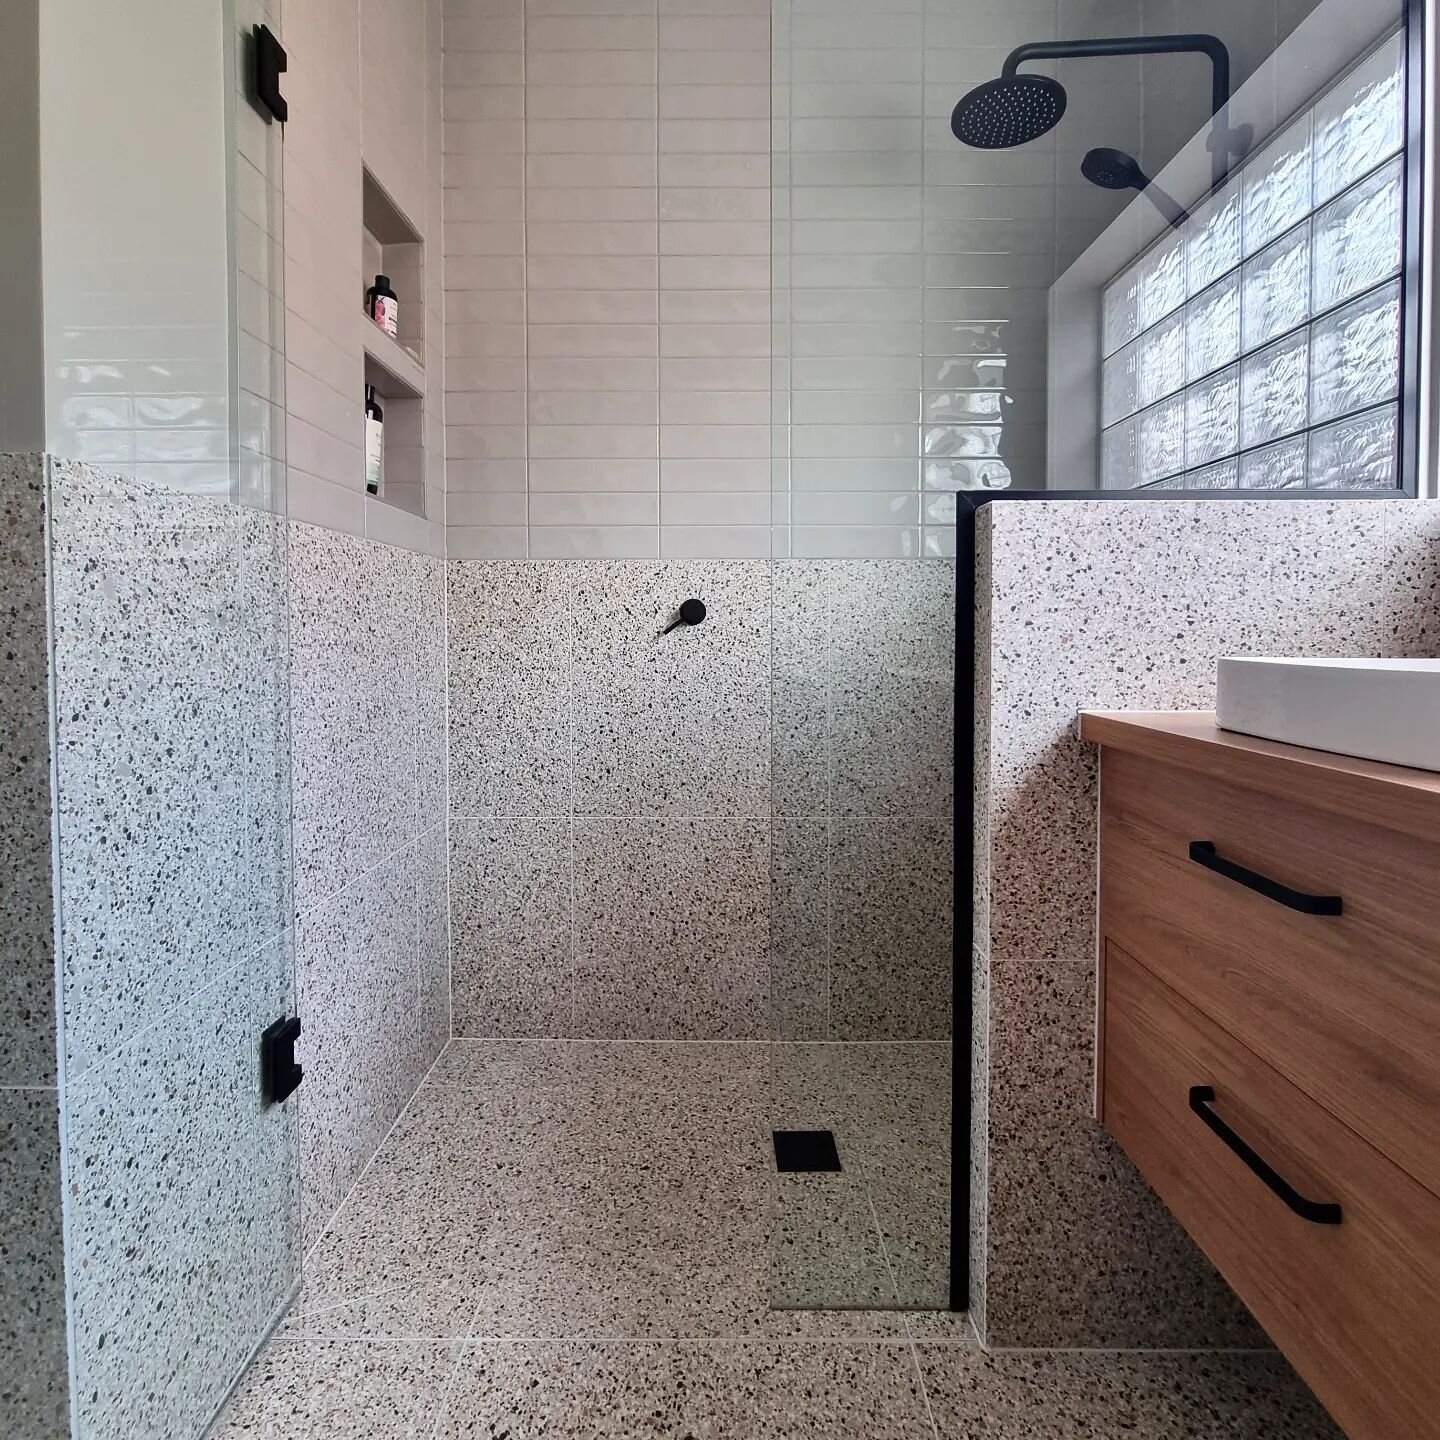 Terrazzo continues! There are so many elements to this bathroom that we love - the original glass brick window, continuing the terrazzo tile from the floor to the walls around the entire room, the beige subways &amp; walls to the black fittings. Oooo